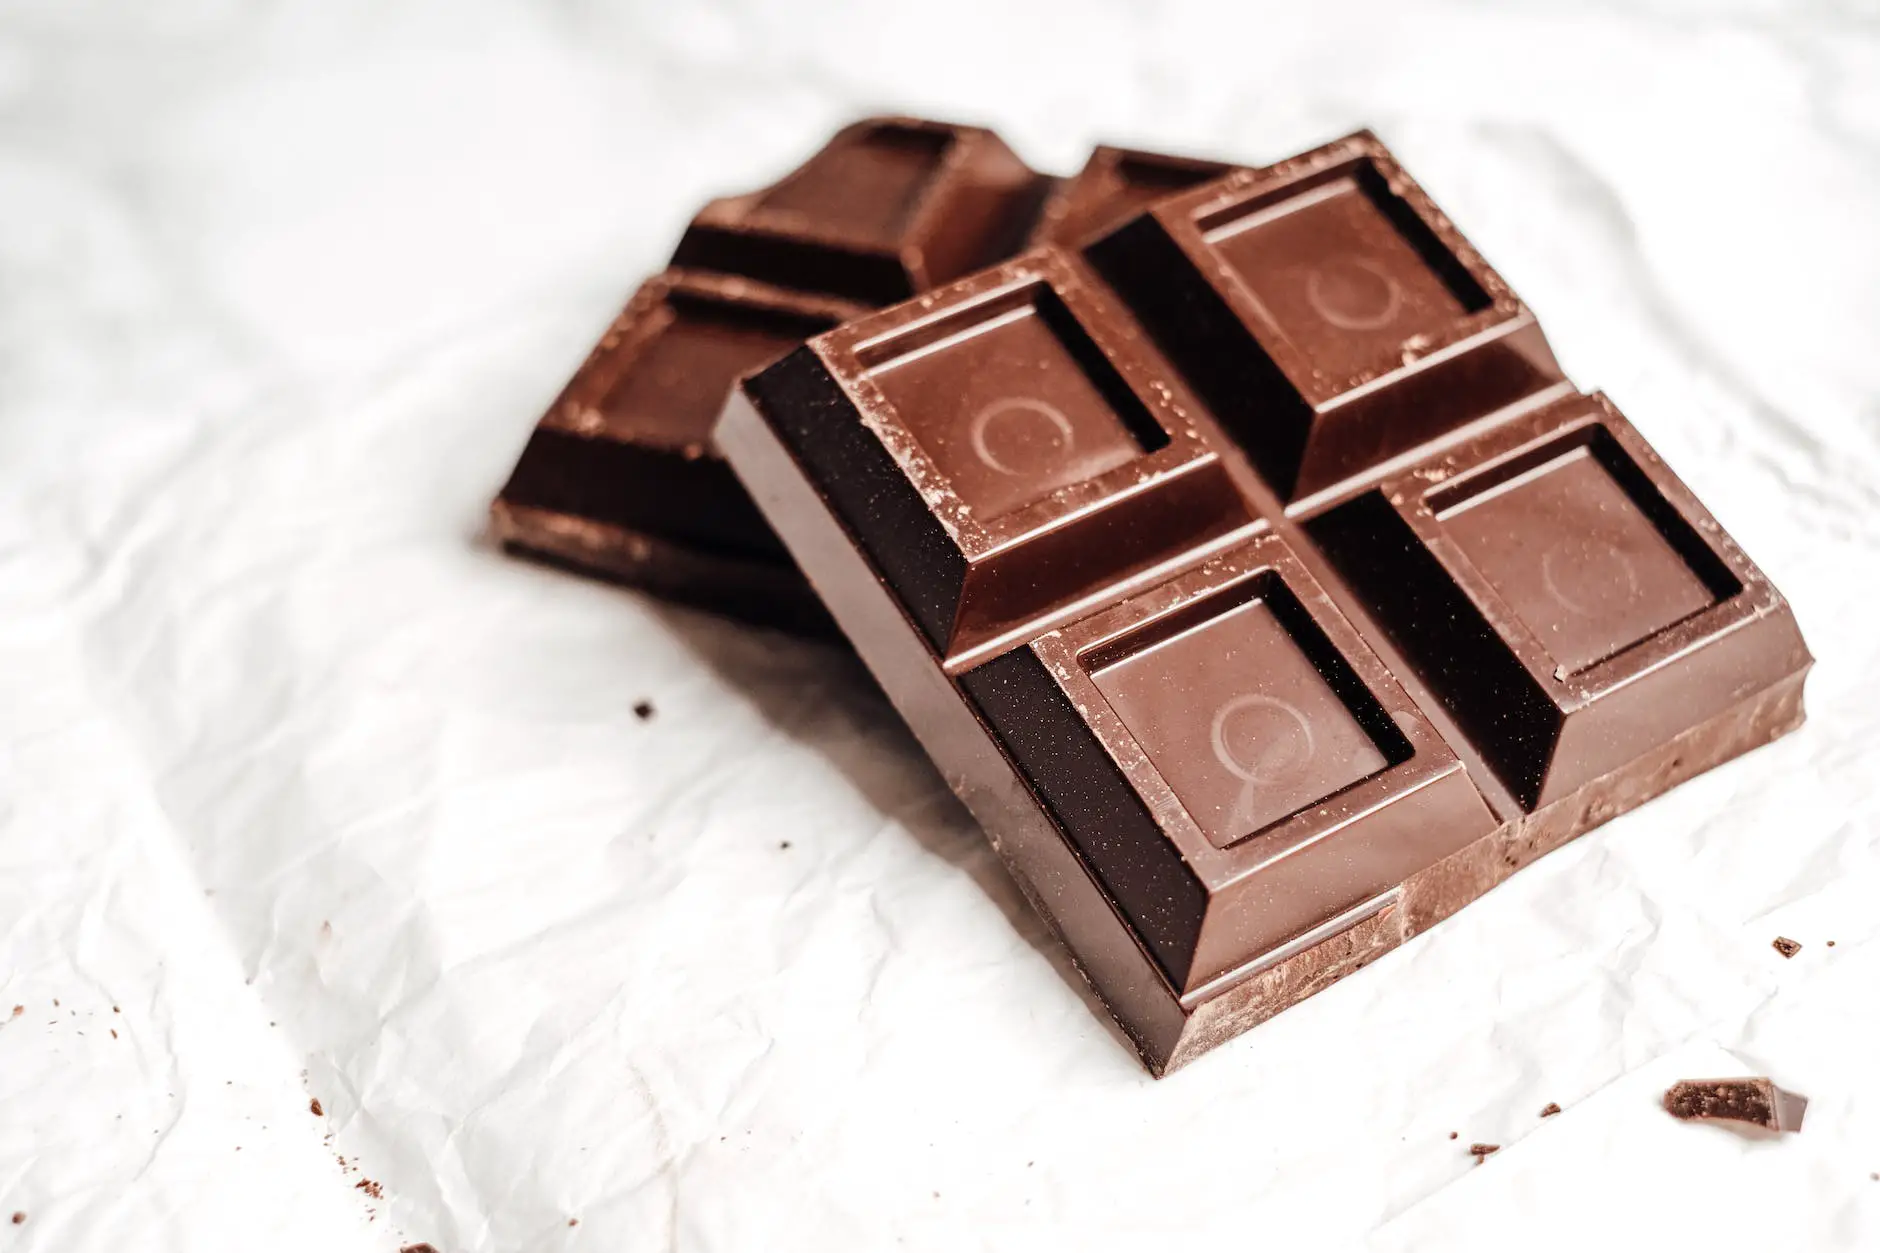 chocolate bars in close up photography